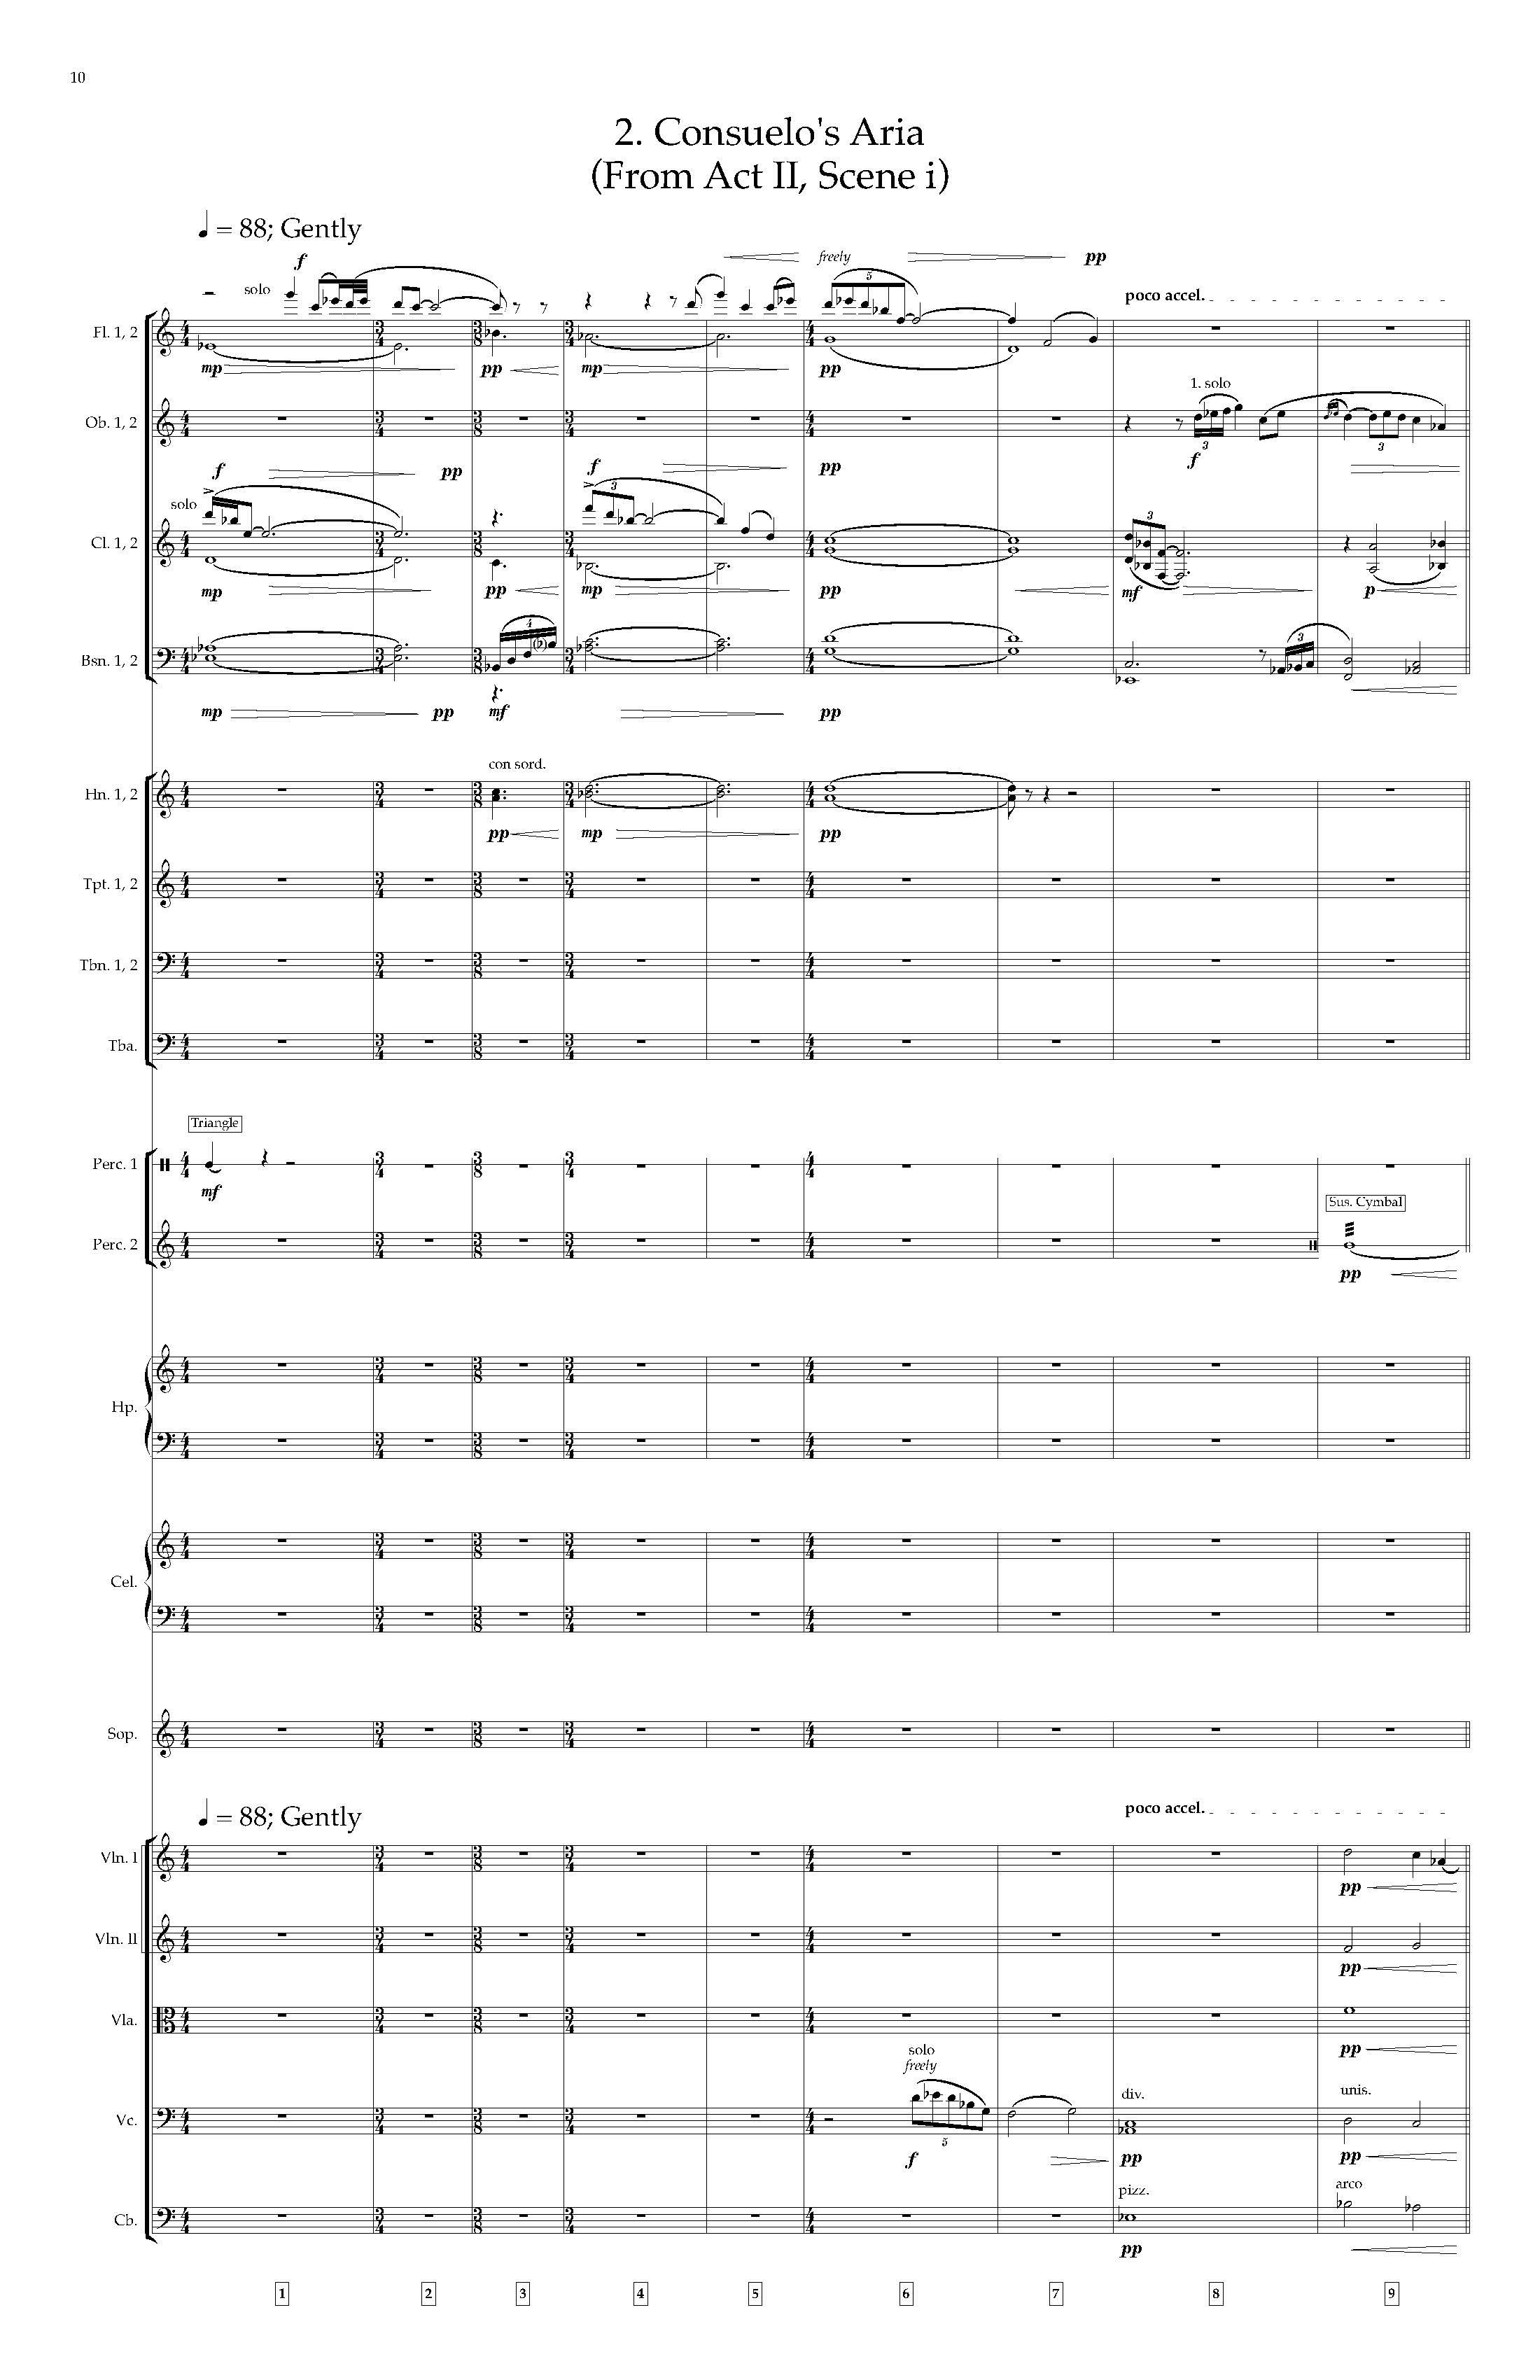 Arias and Interludes from HWGS - Complete Score_Page_16.jpg